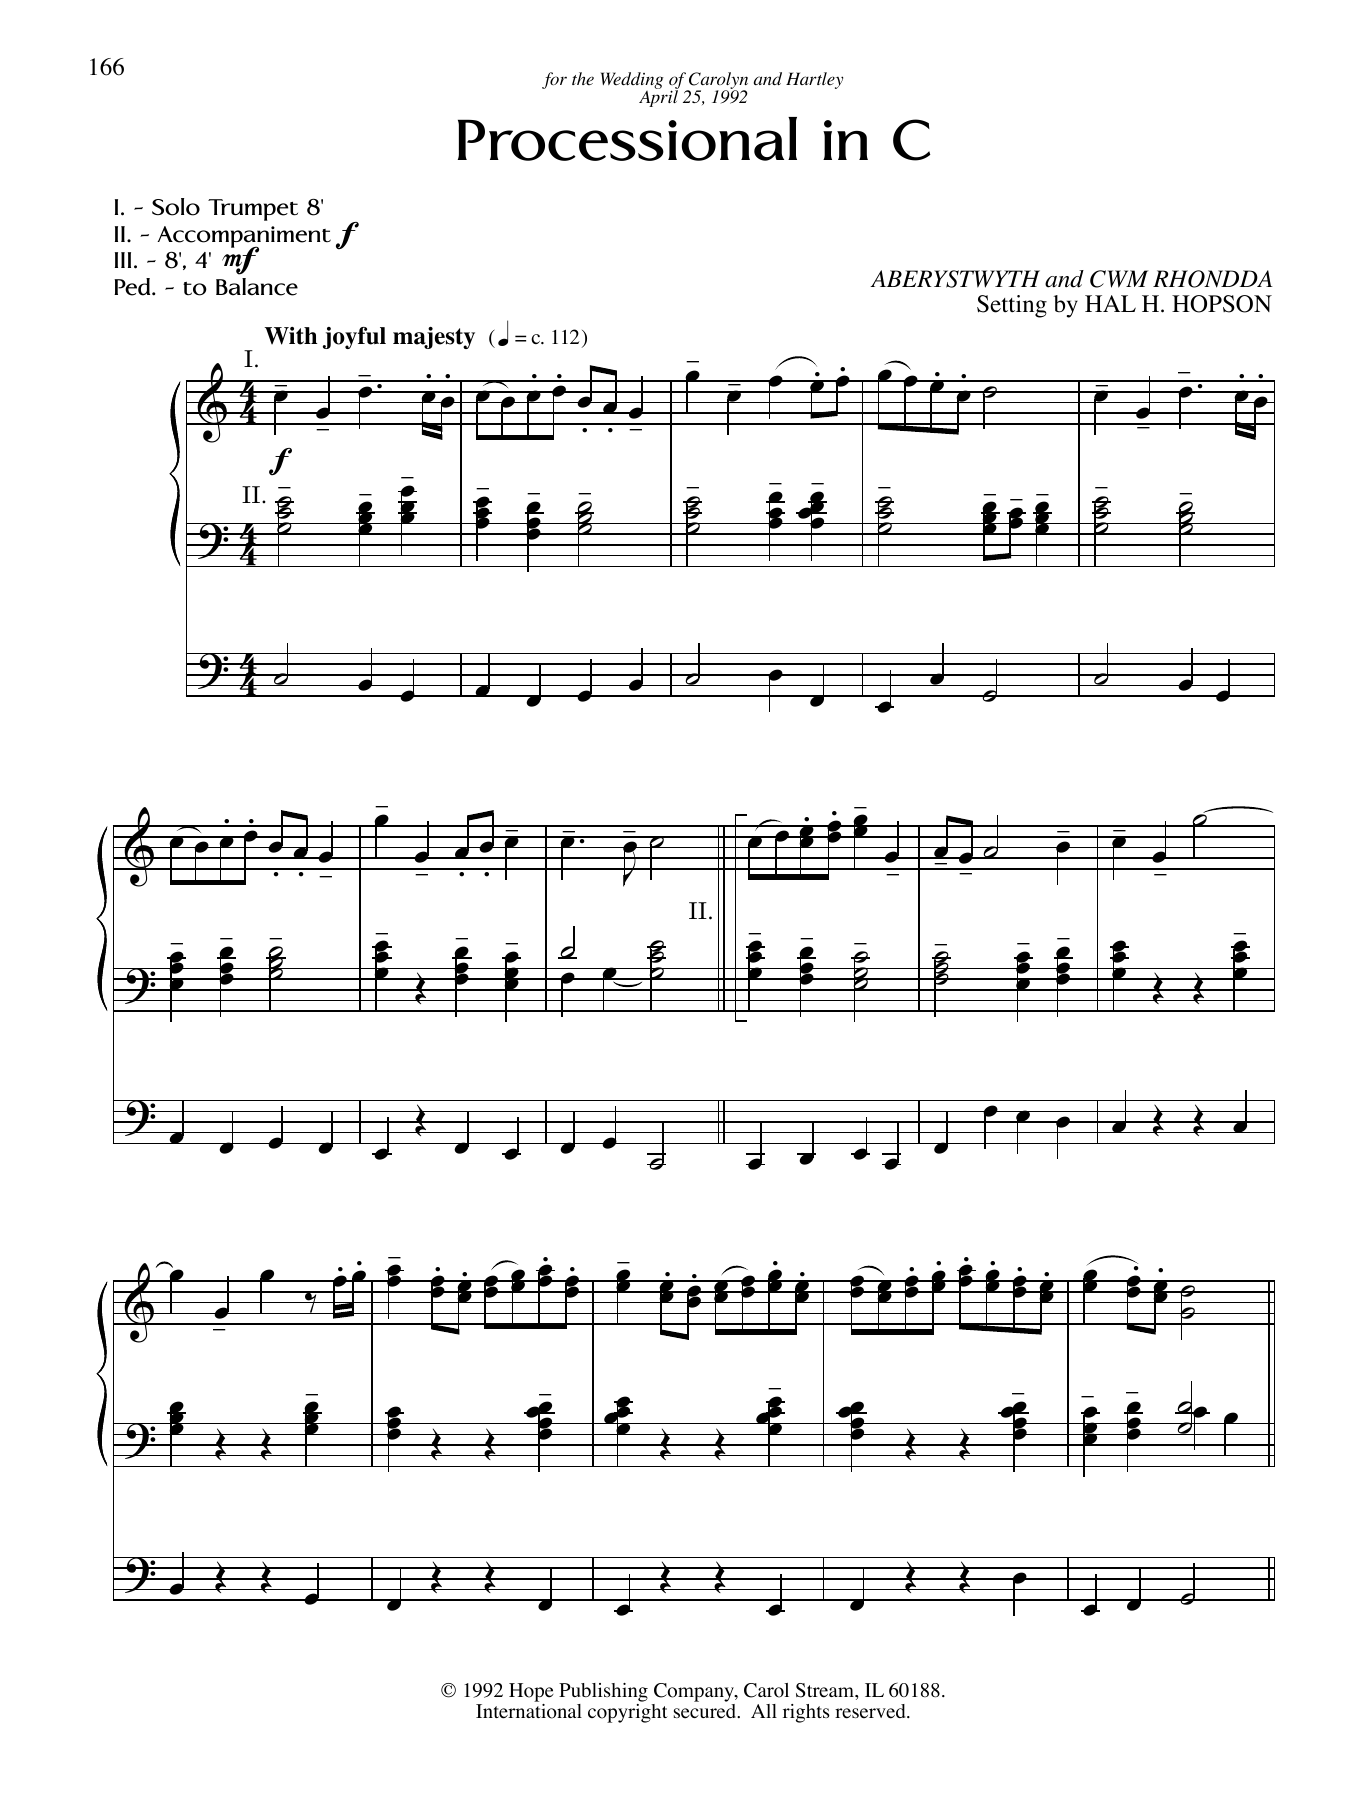 Download Hal H. Hopson Processional in C Sheet Music